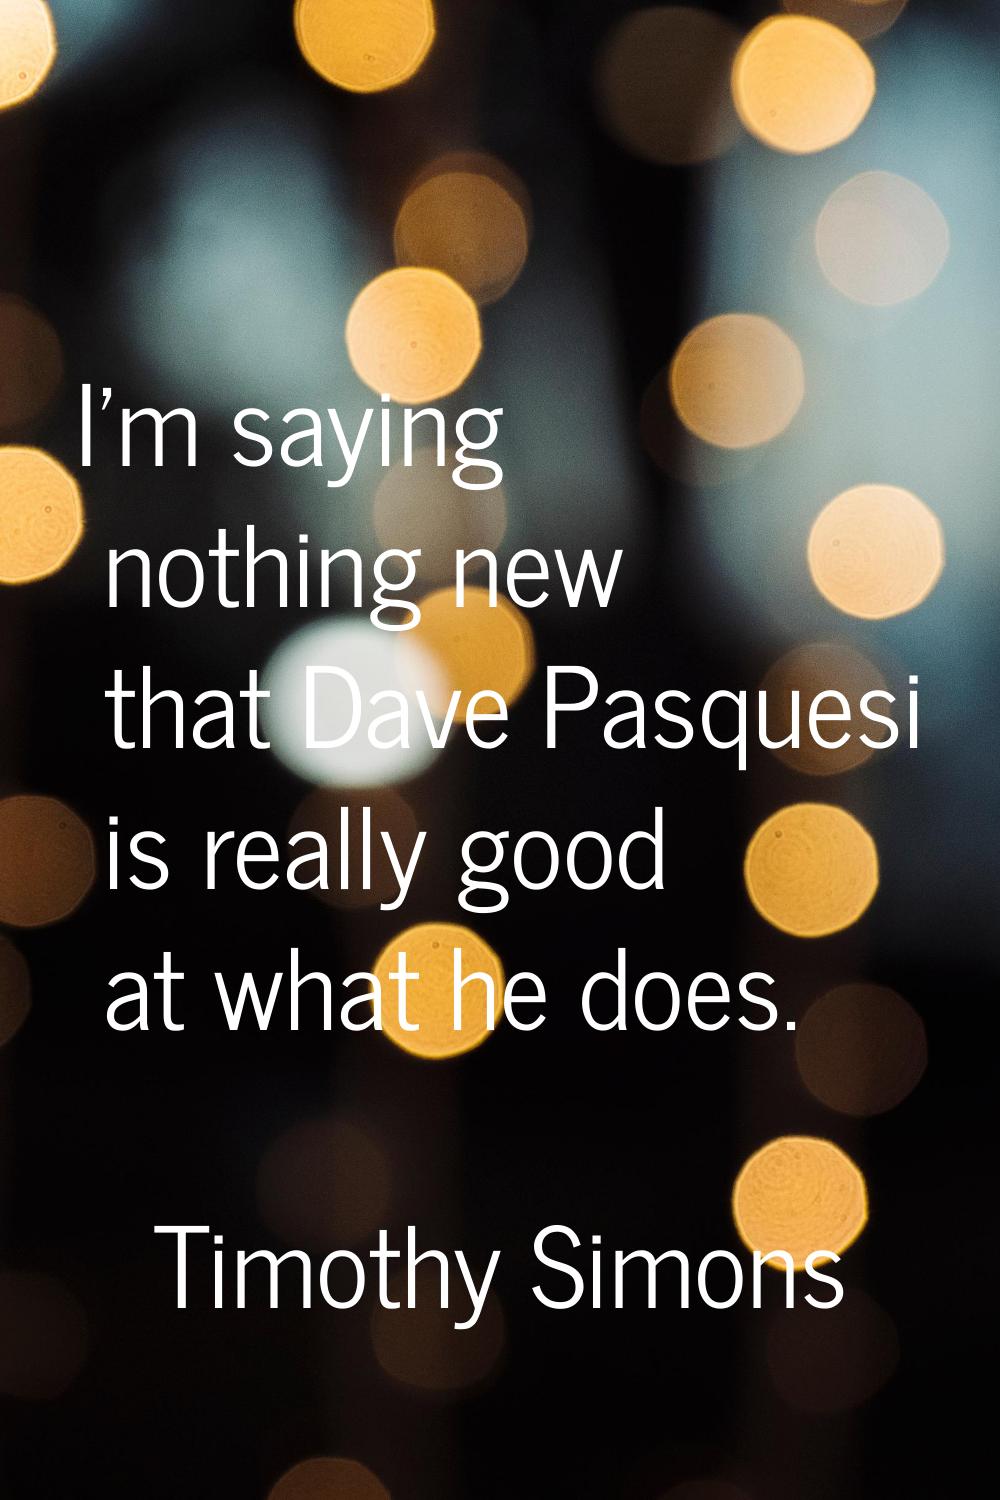 I'm saying nothing new that Dave Pasquesi is really good at what he does.